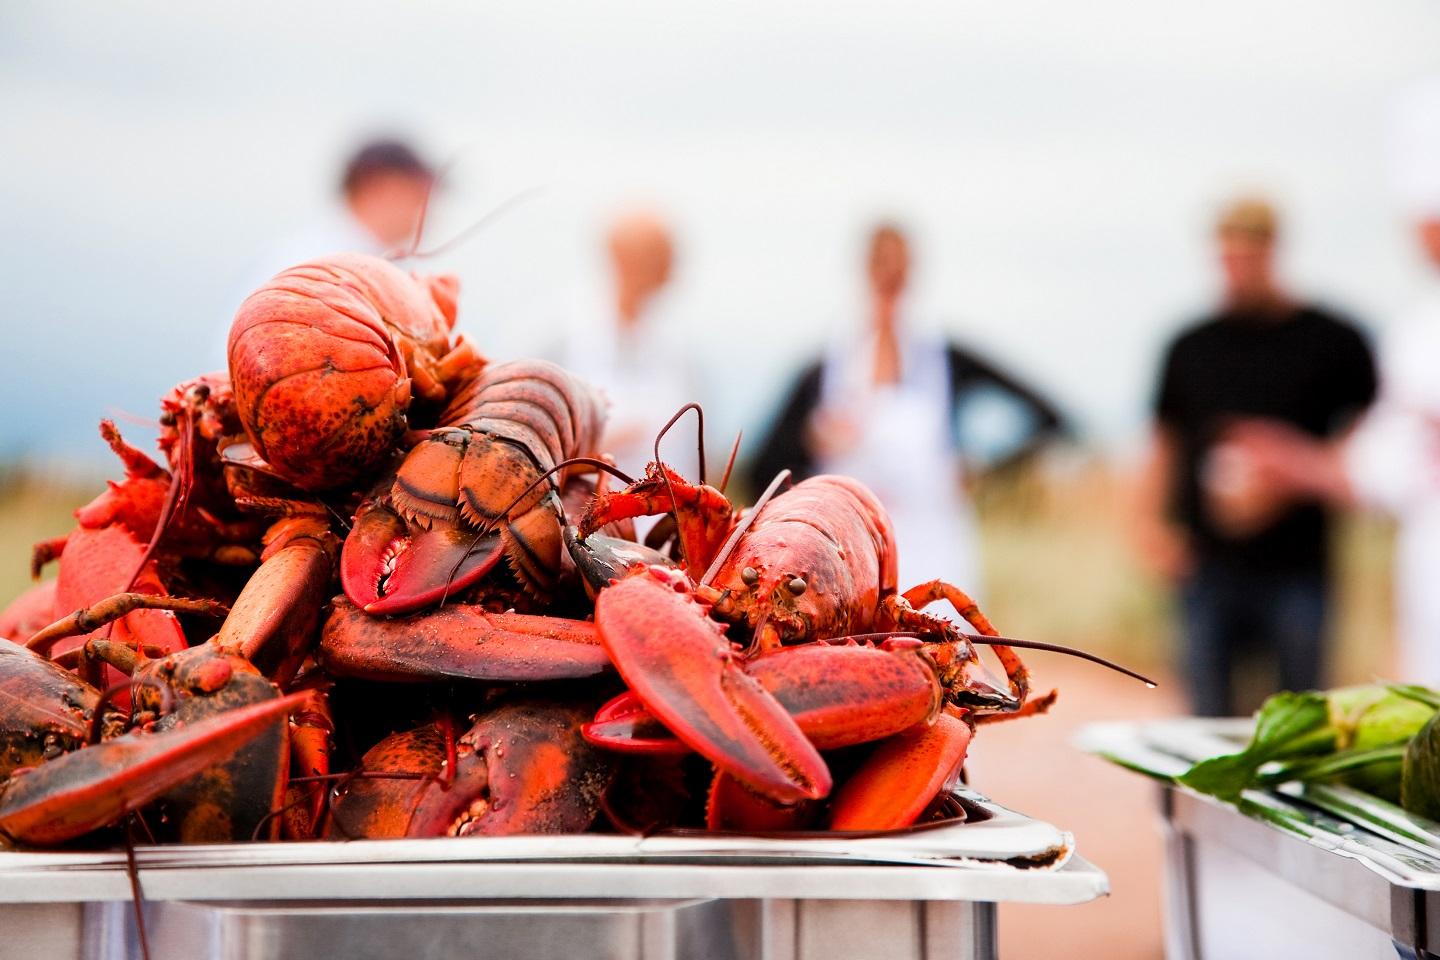 Private catered BBQ on a pristine island beach — Lobster and steak is the perfect island pairing